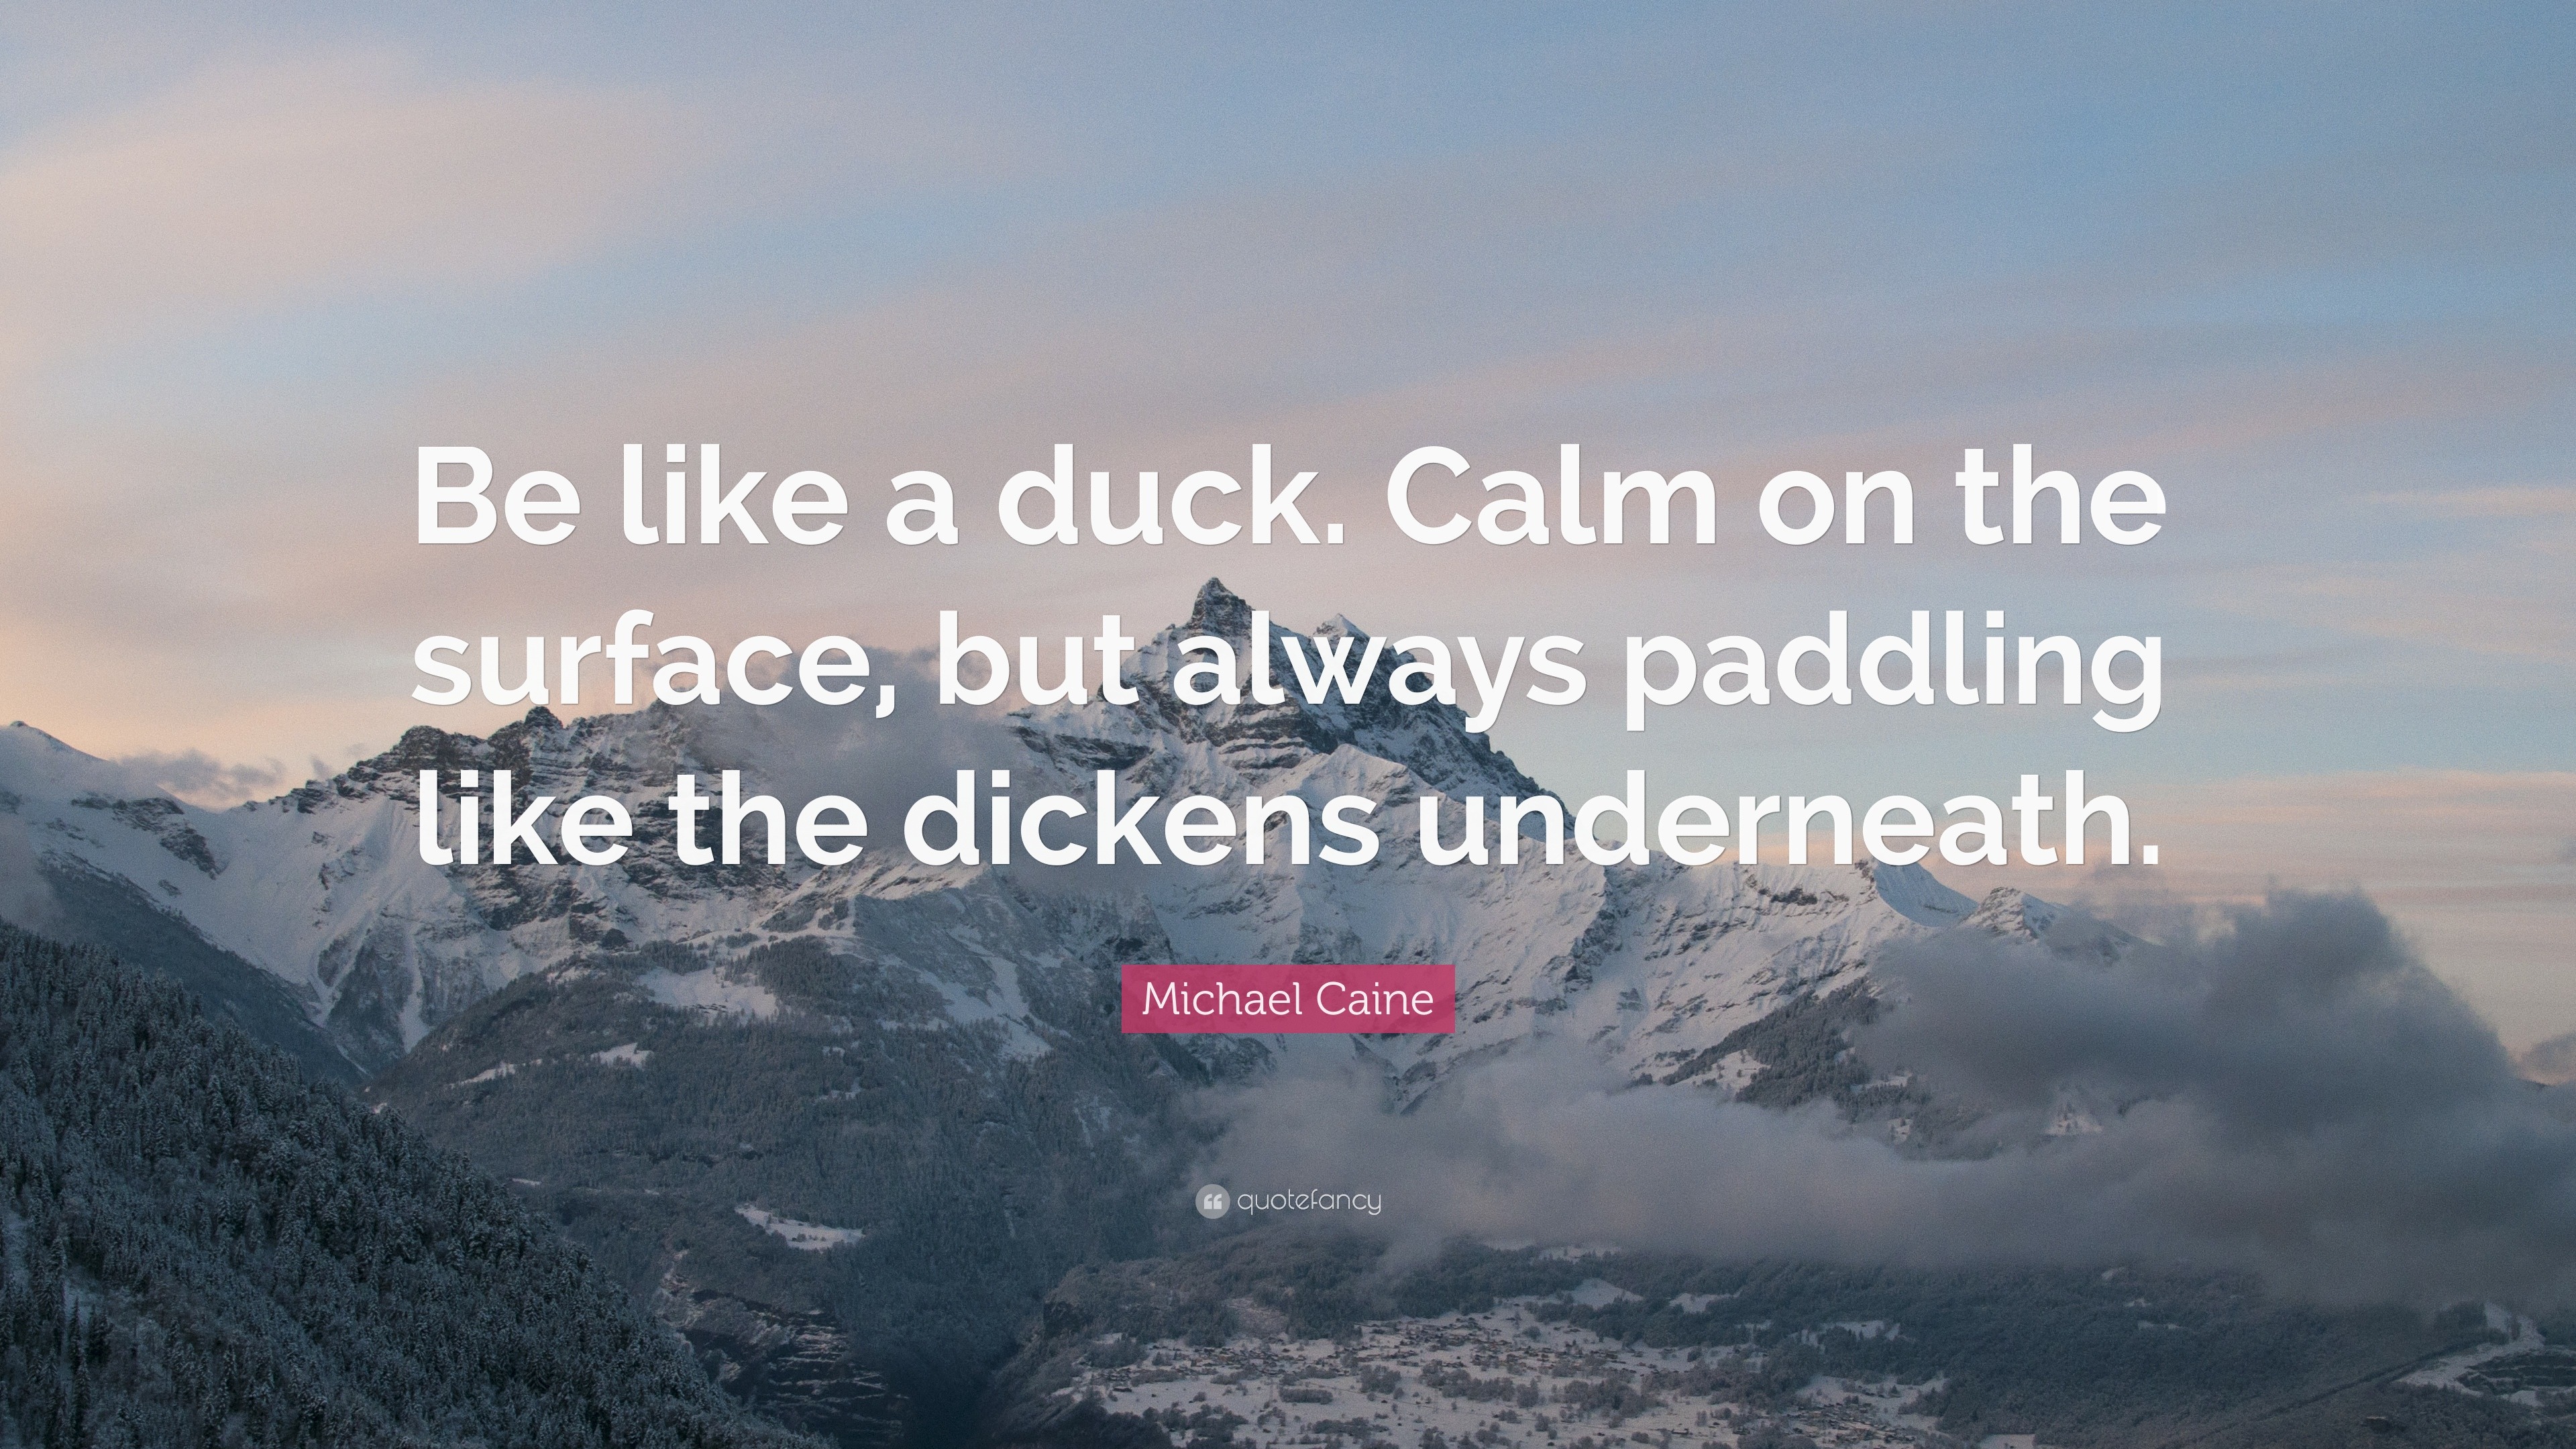 NEW MOTIVATIONAL POSTER Michael Caine "Be Like a Duck ..." 